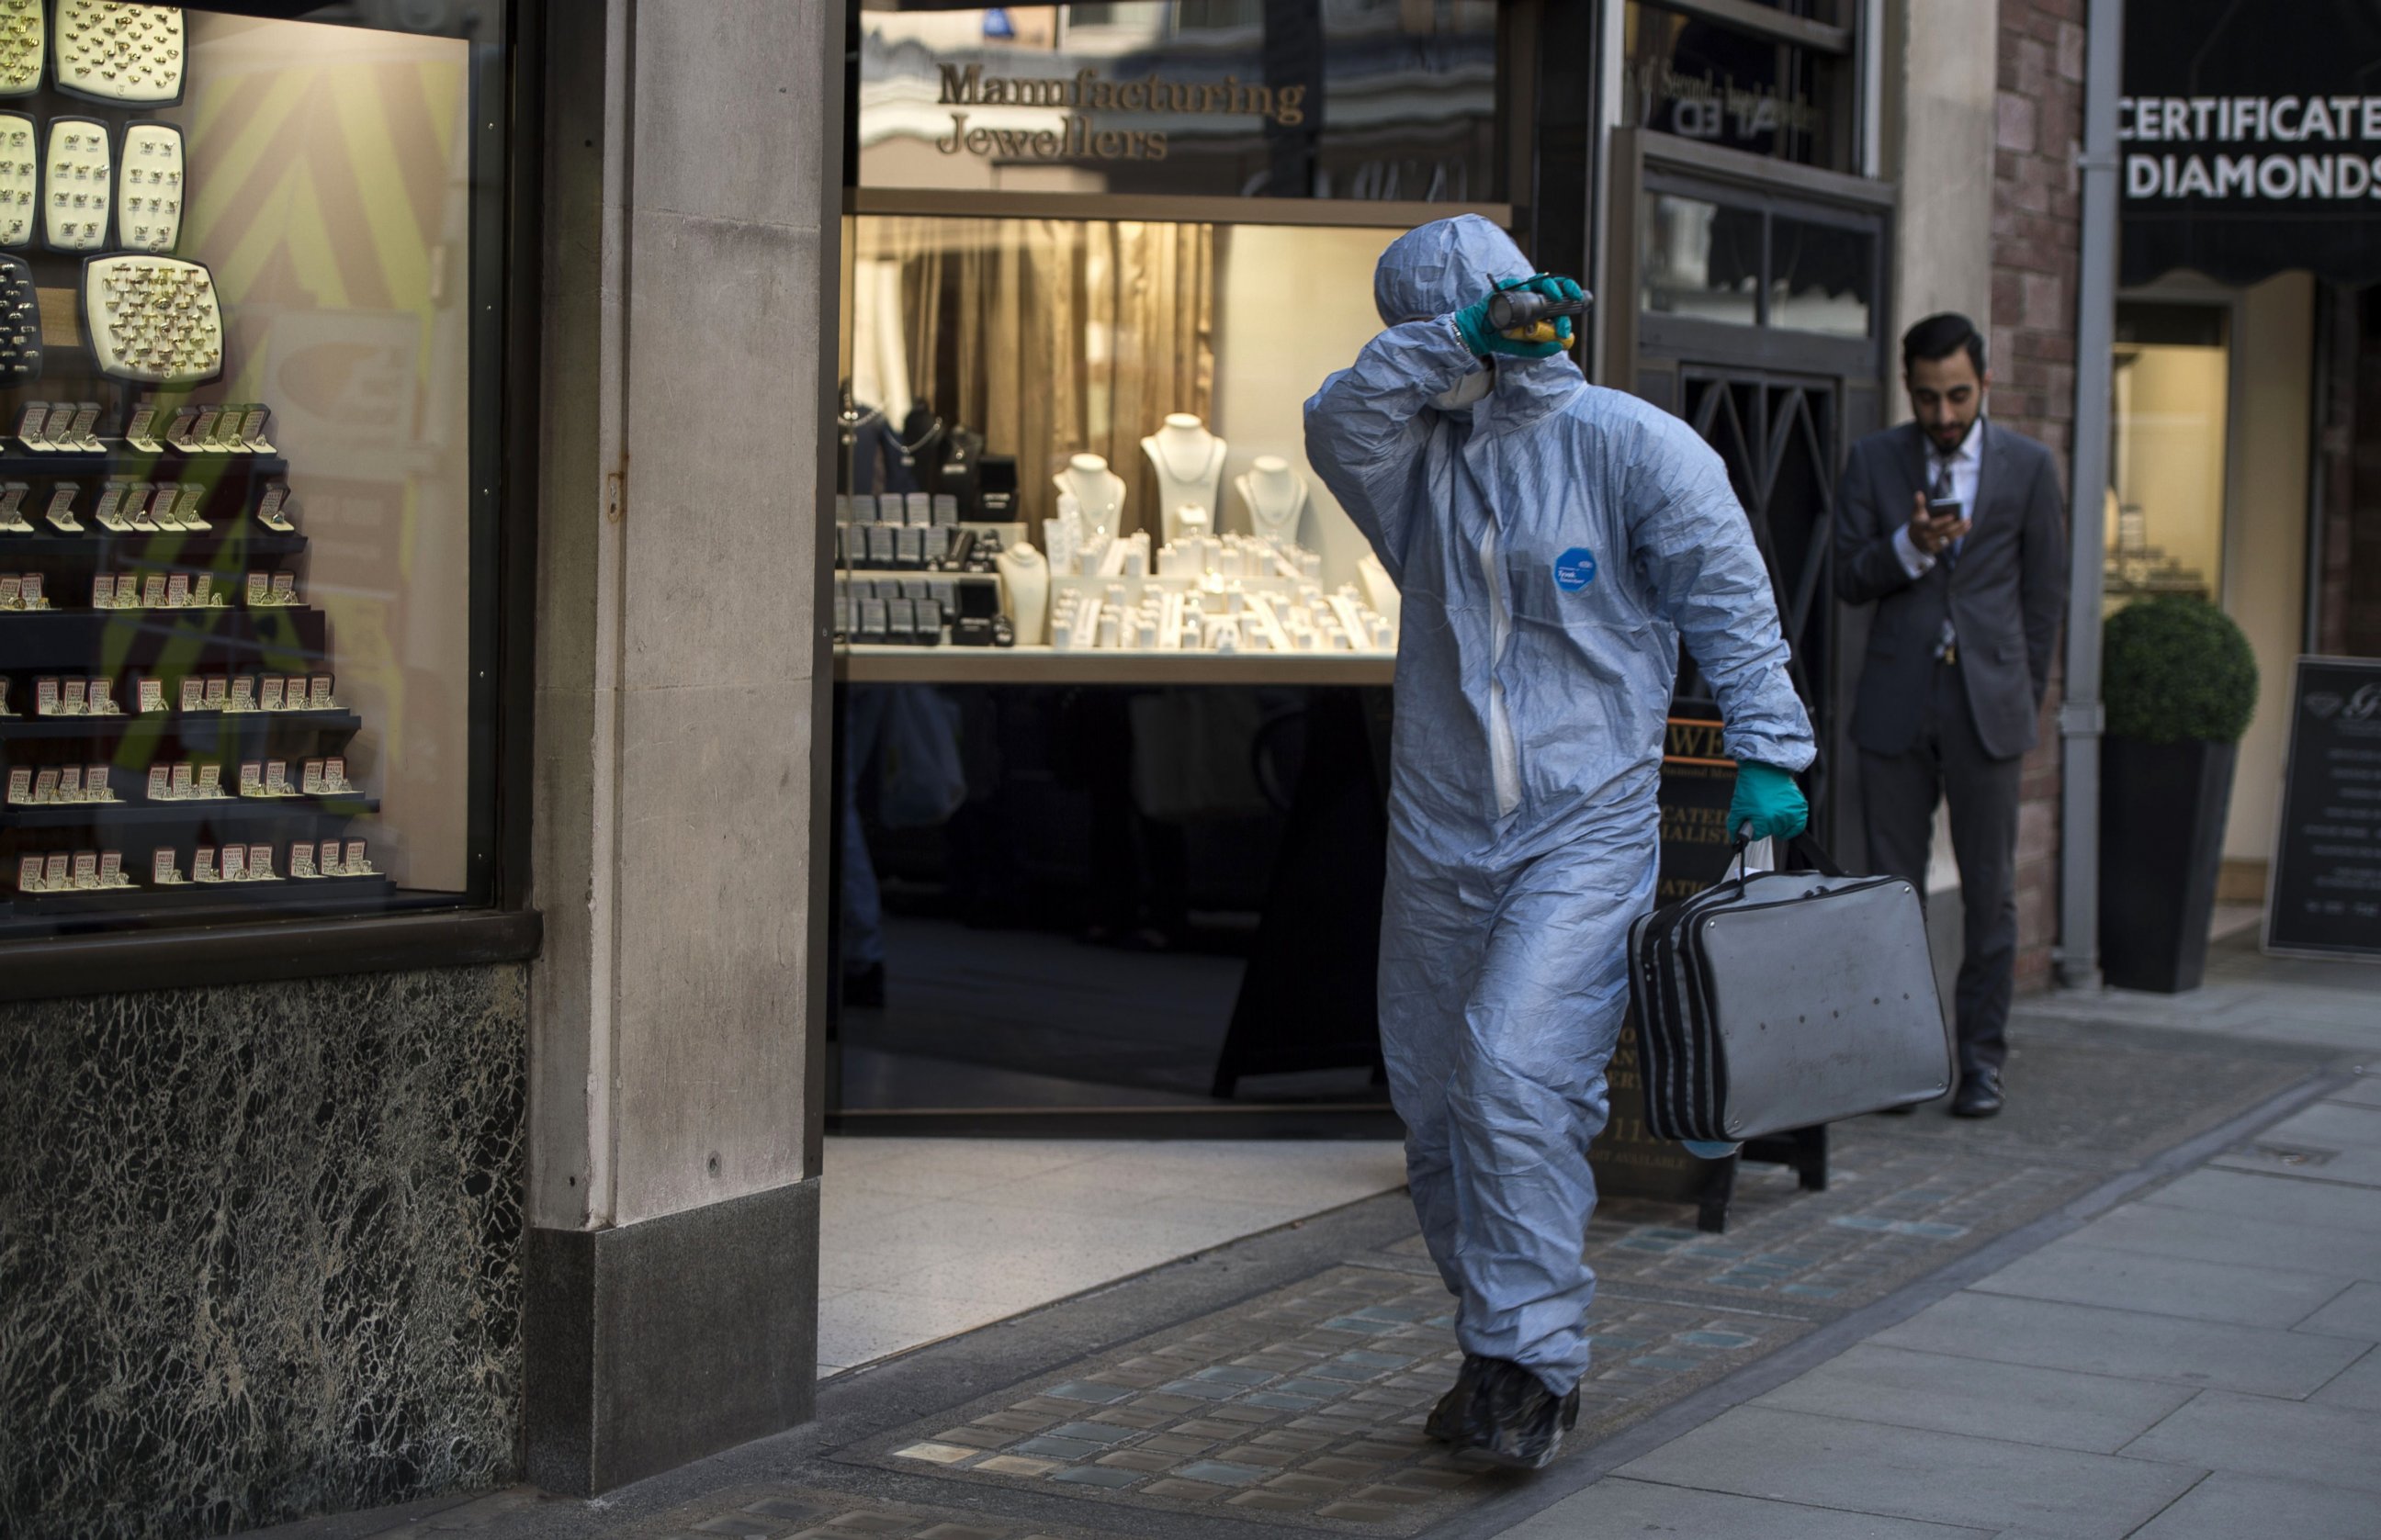 PHOTO: A forensic expert arrives at the Hatton Garden Safe Deposit Limited on April 7, 2015 in London.